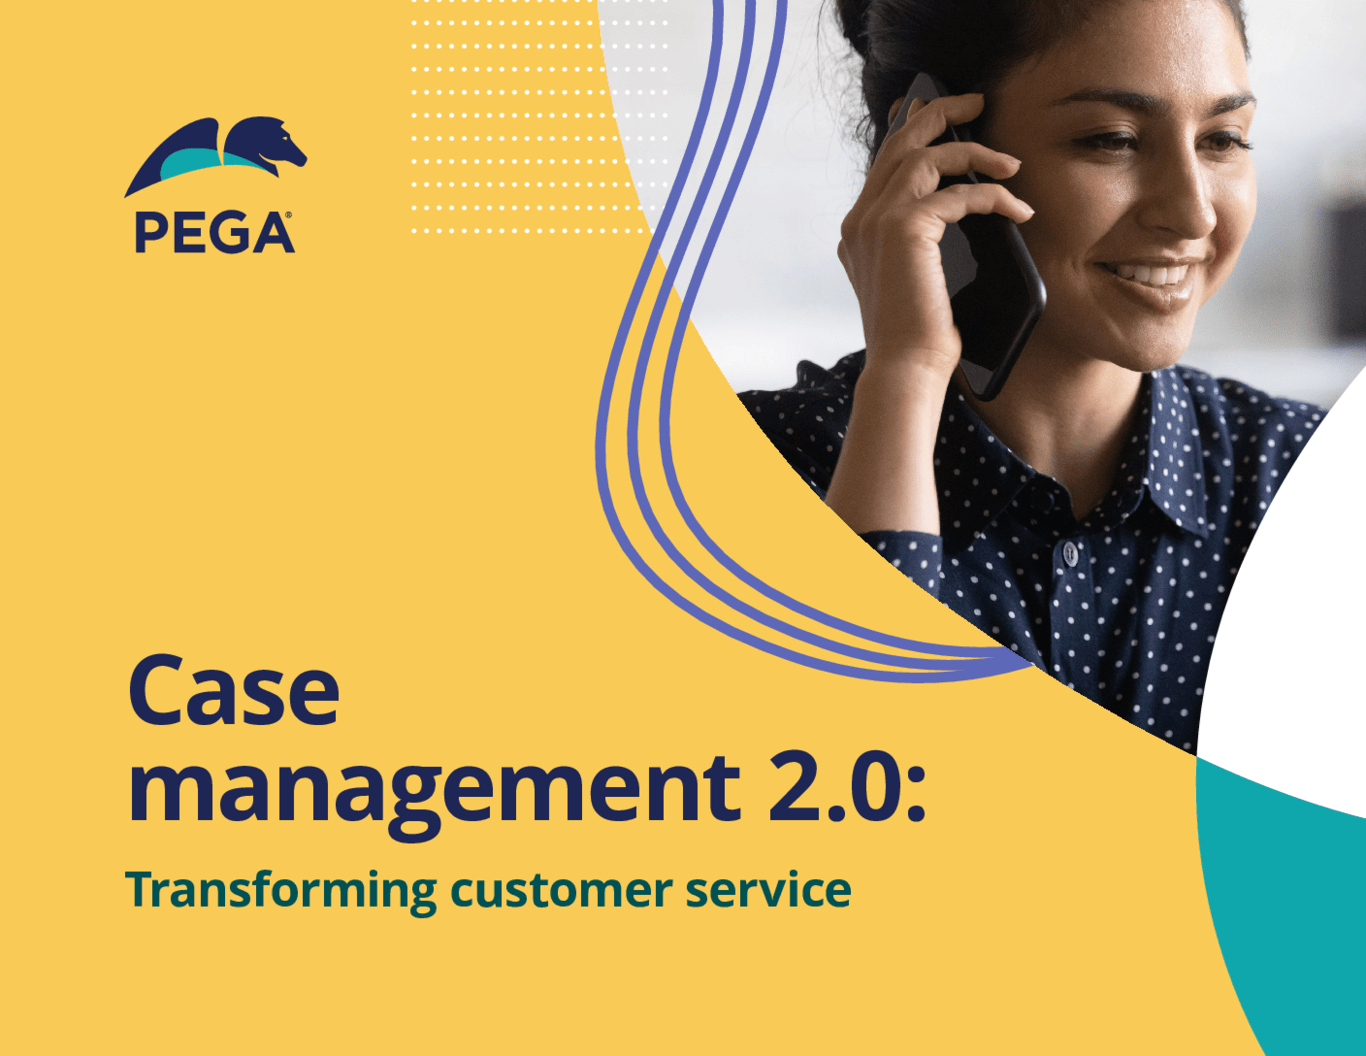 Transforming customer service with case management 2.0